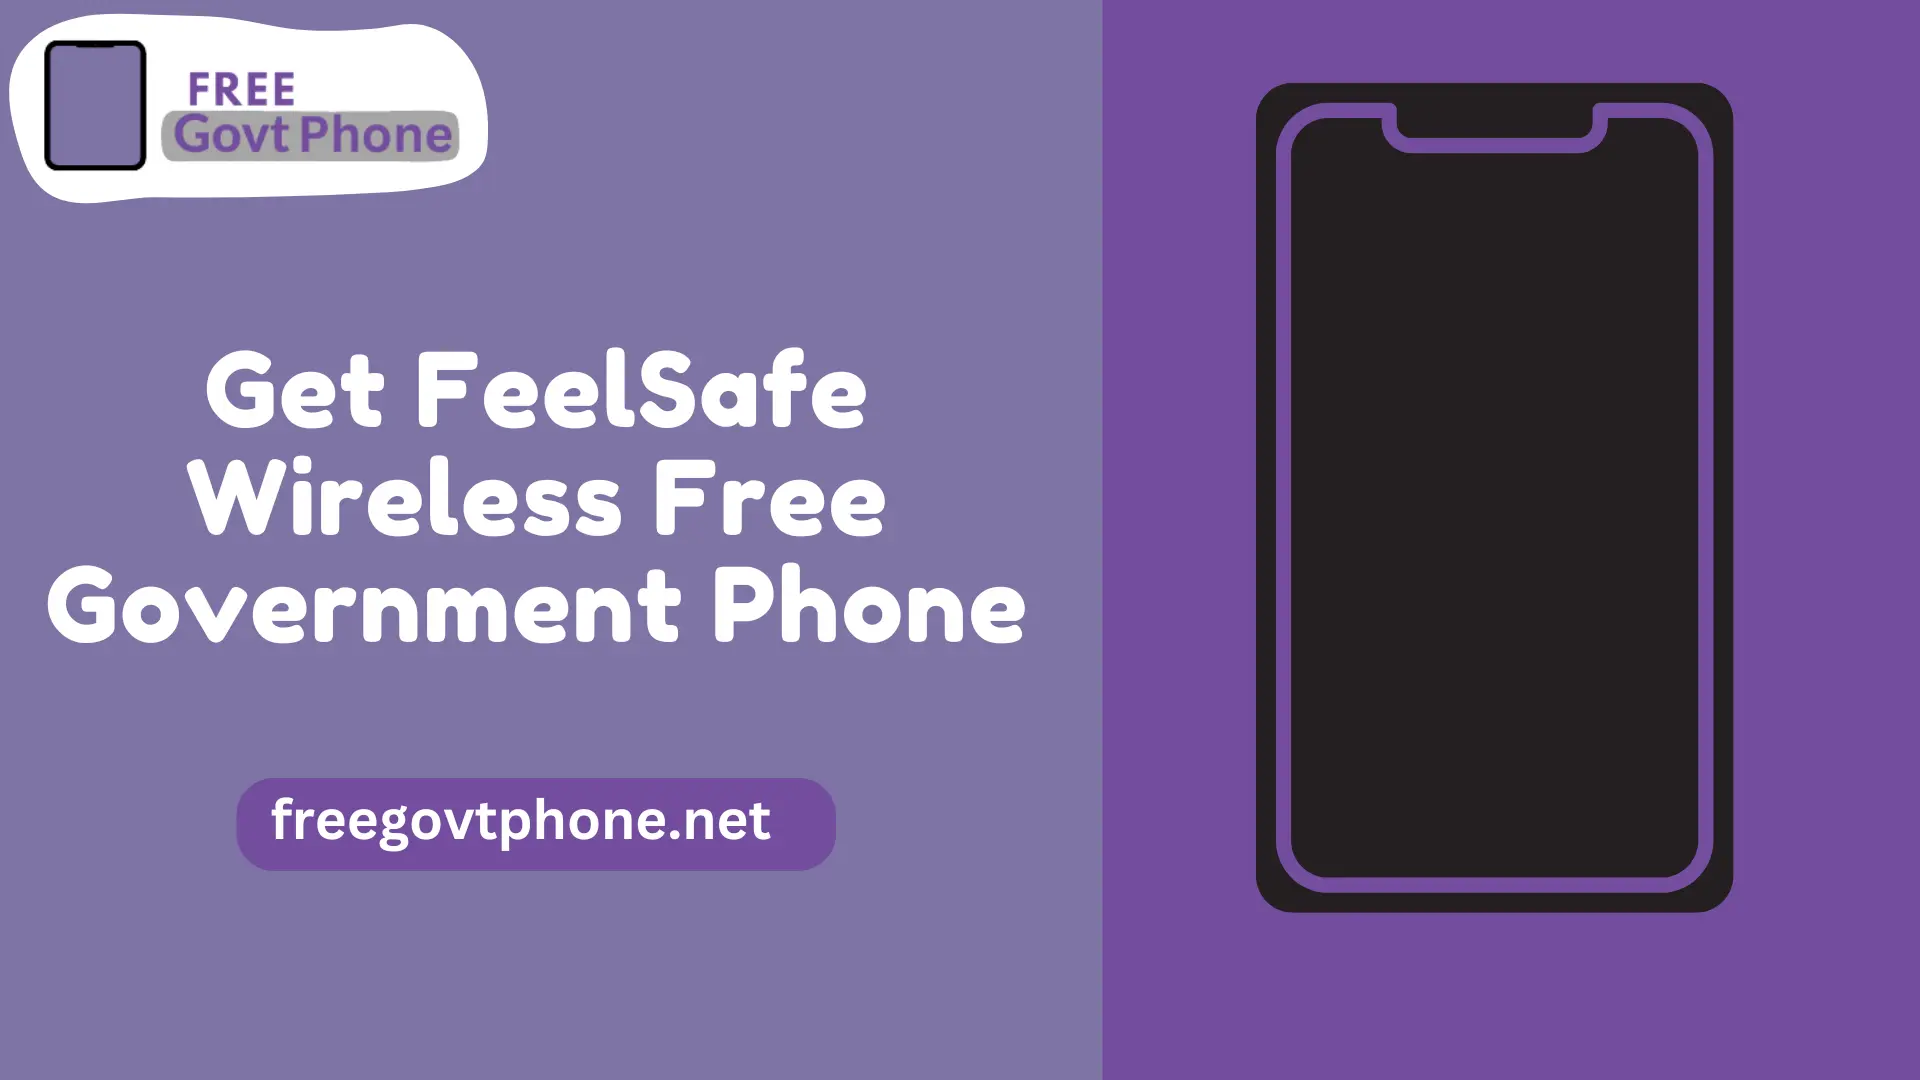 How to Get FeelSafe Wireless Free Government Phone